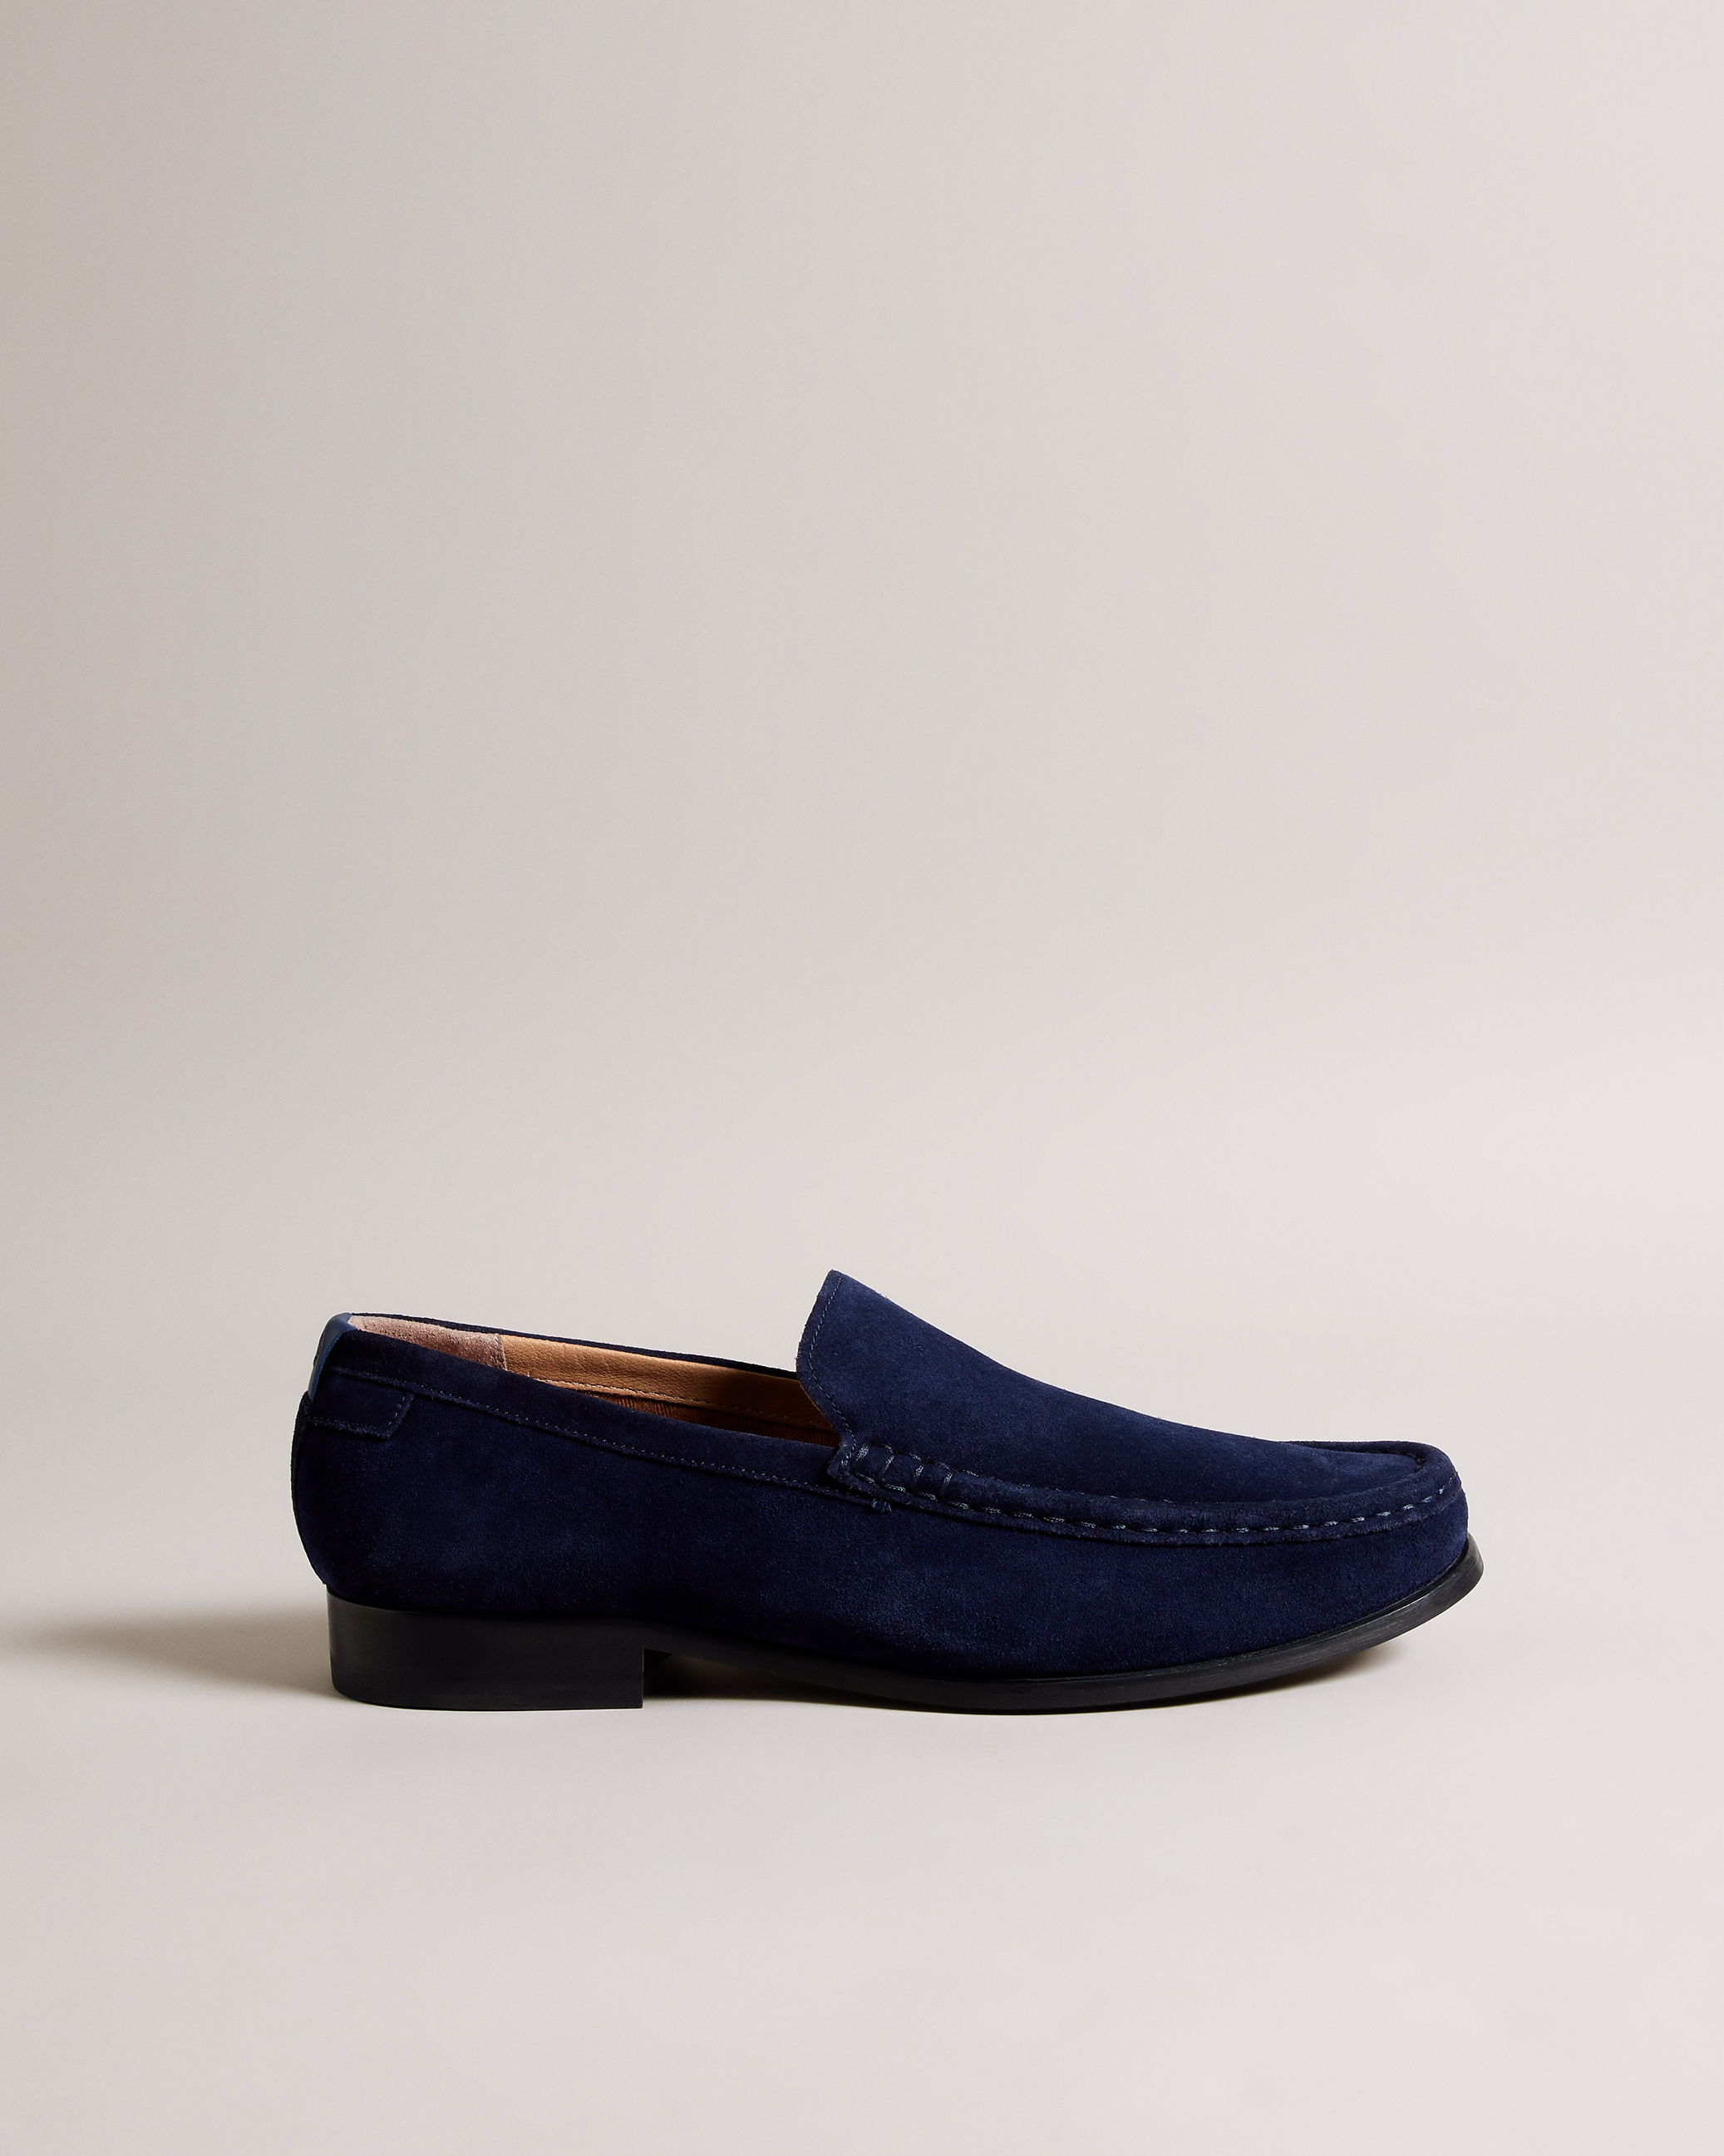 Ted Baker Men's Daveon Dark Blue Loafers Shoes